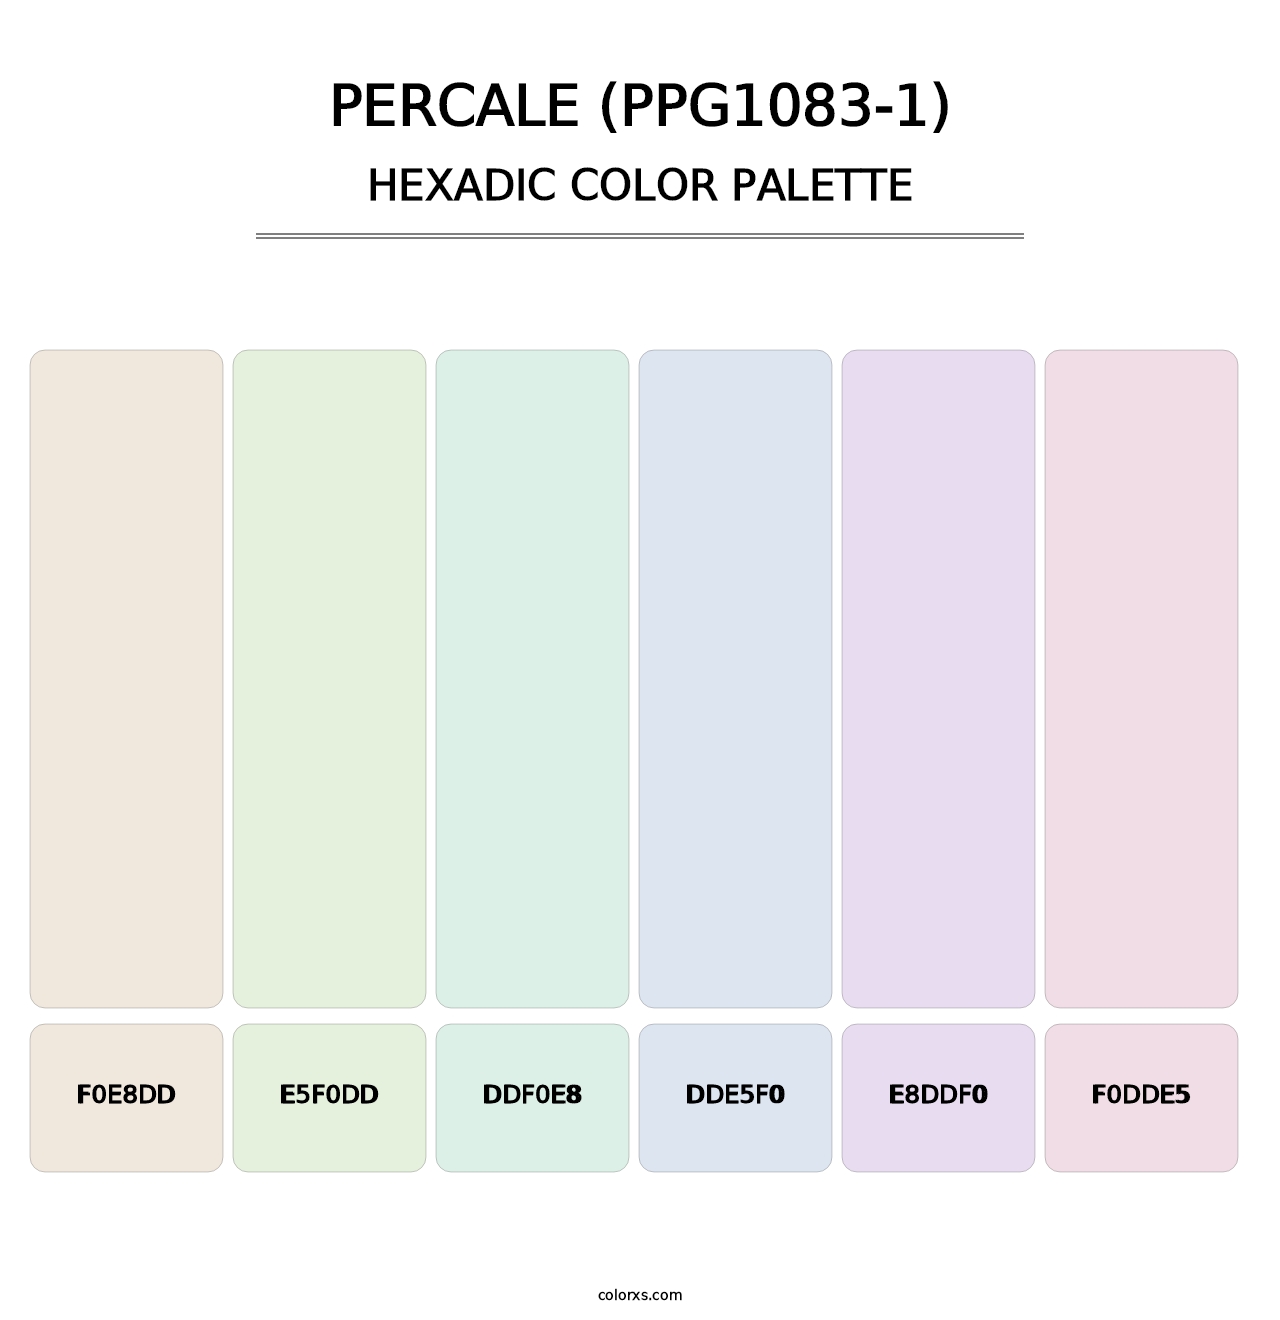 Percale (PPG1083-1) - Hexadic Color Palette